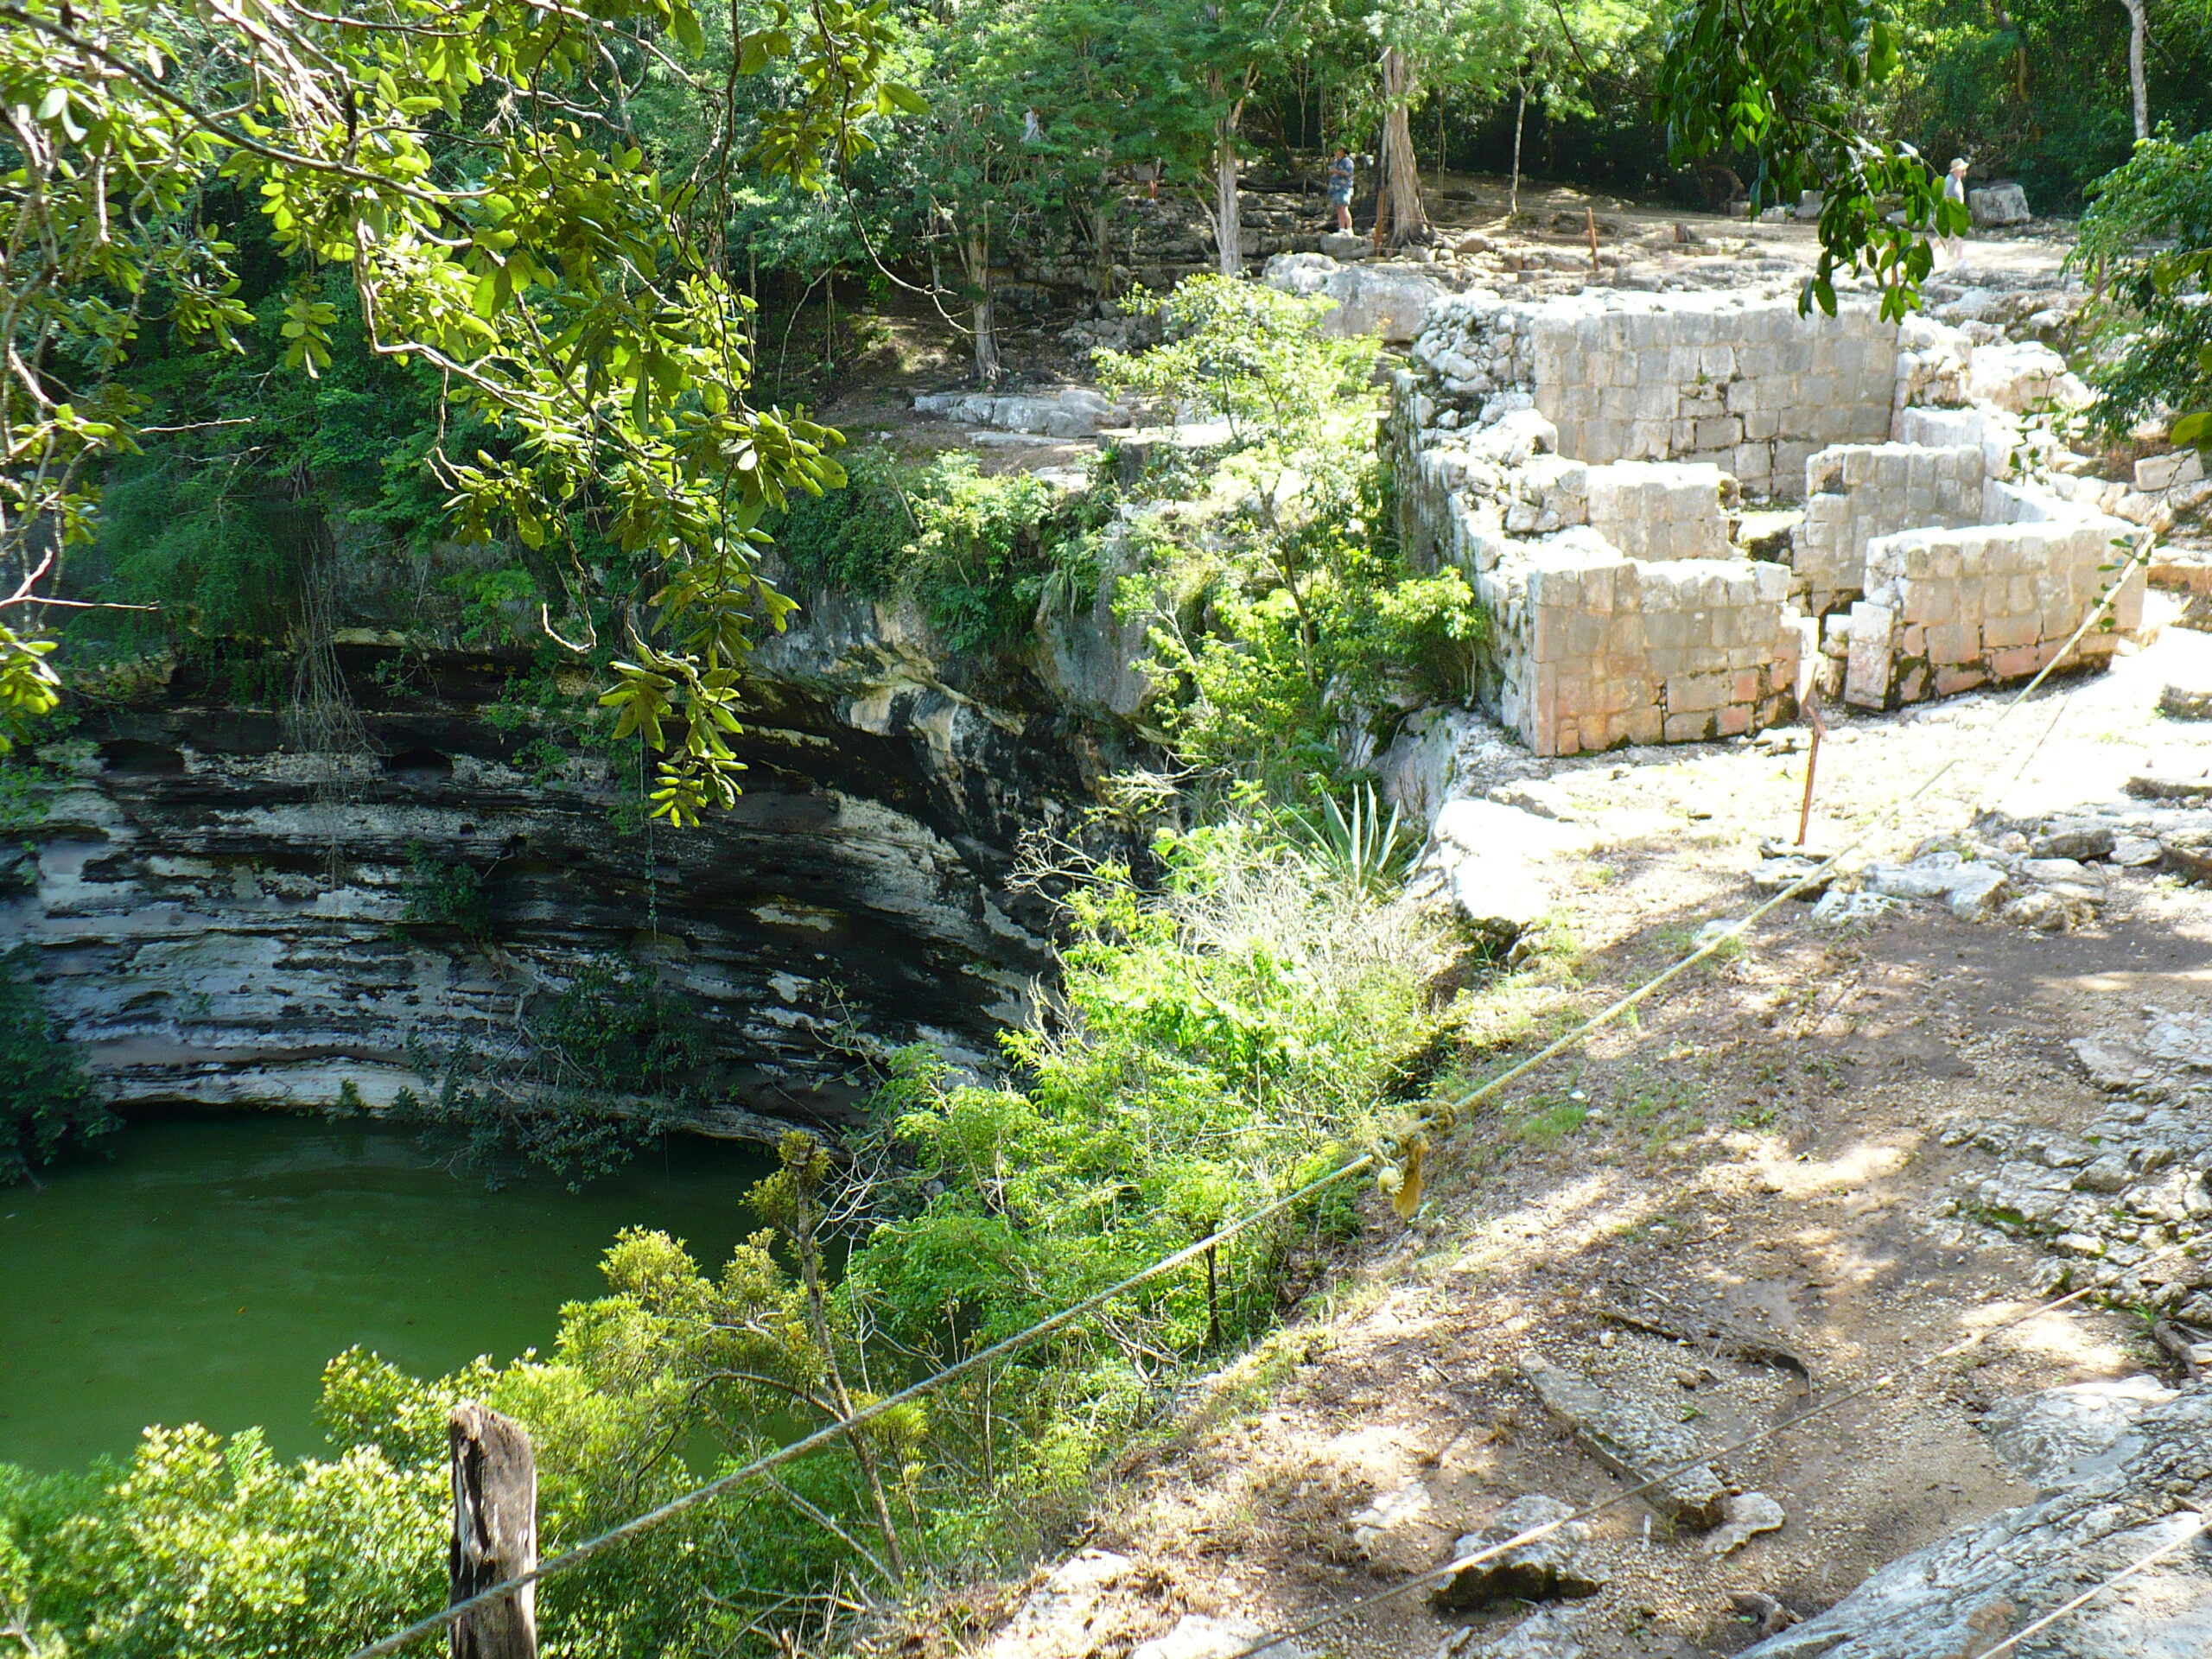 A photo of the sinkhole Sacred Cenote near the Chichen ruins.